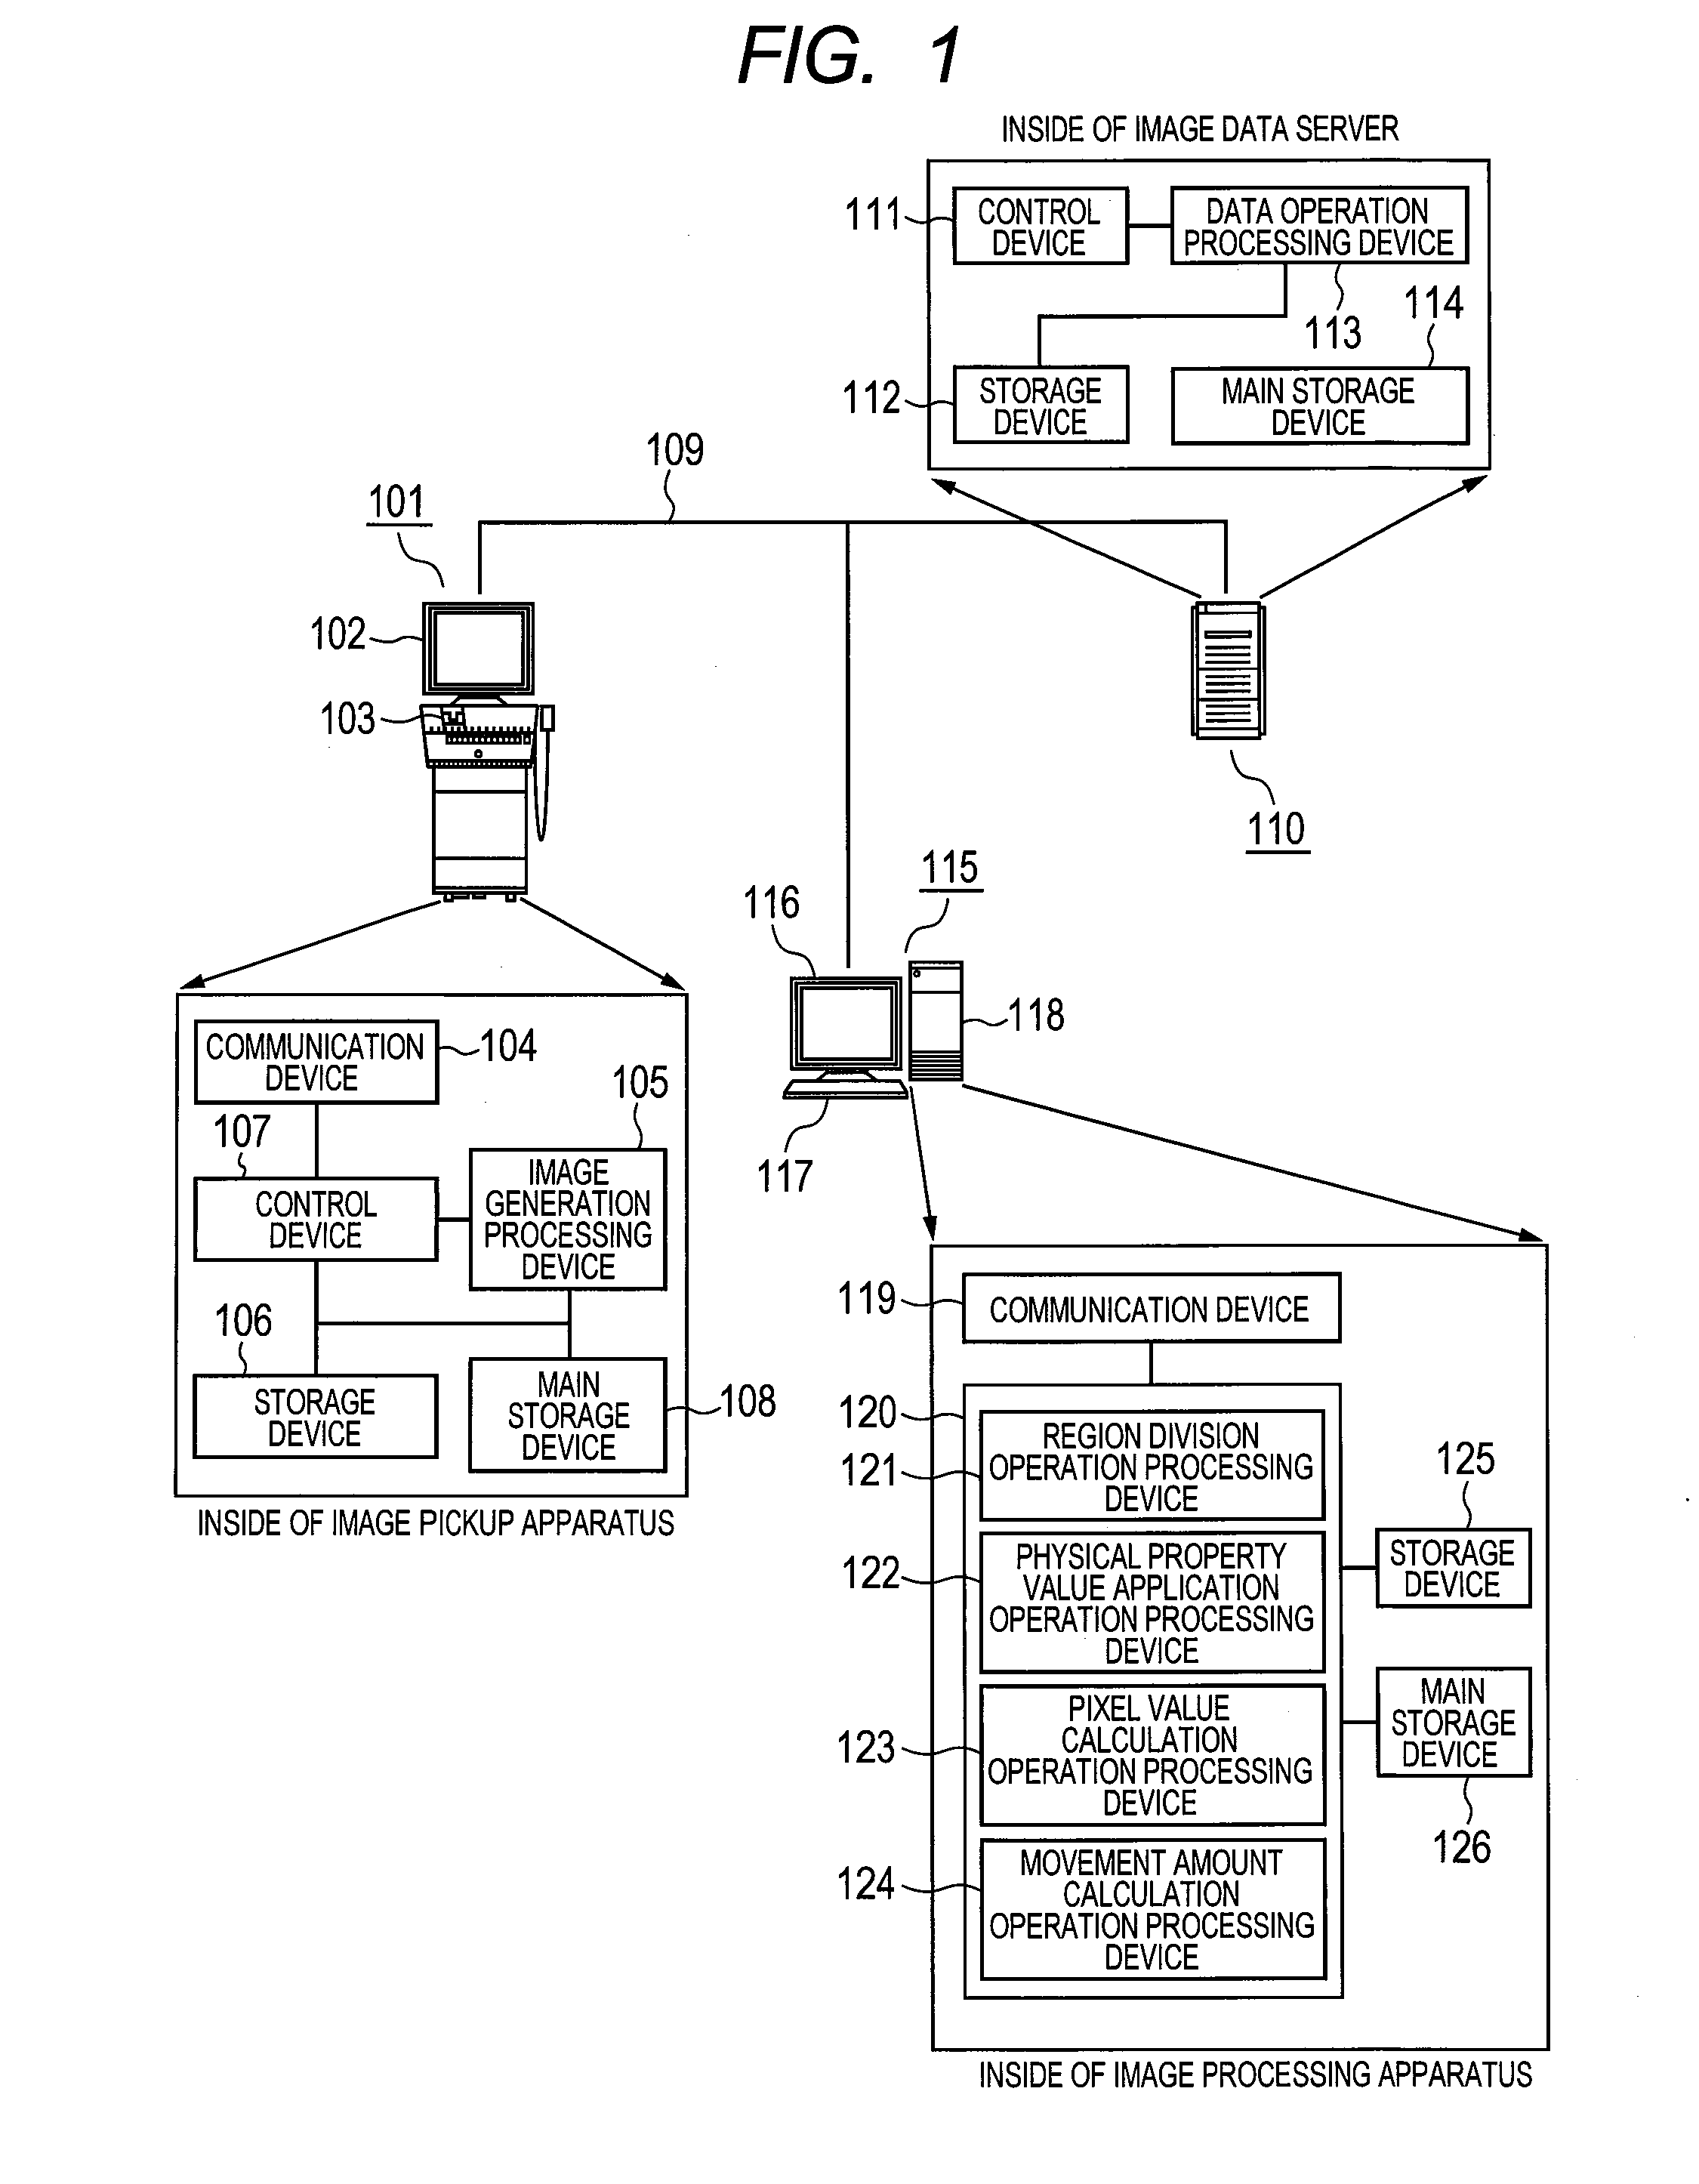 Image processing apparatus and image registration method